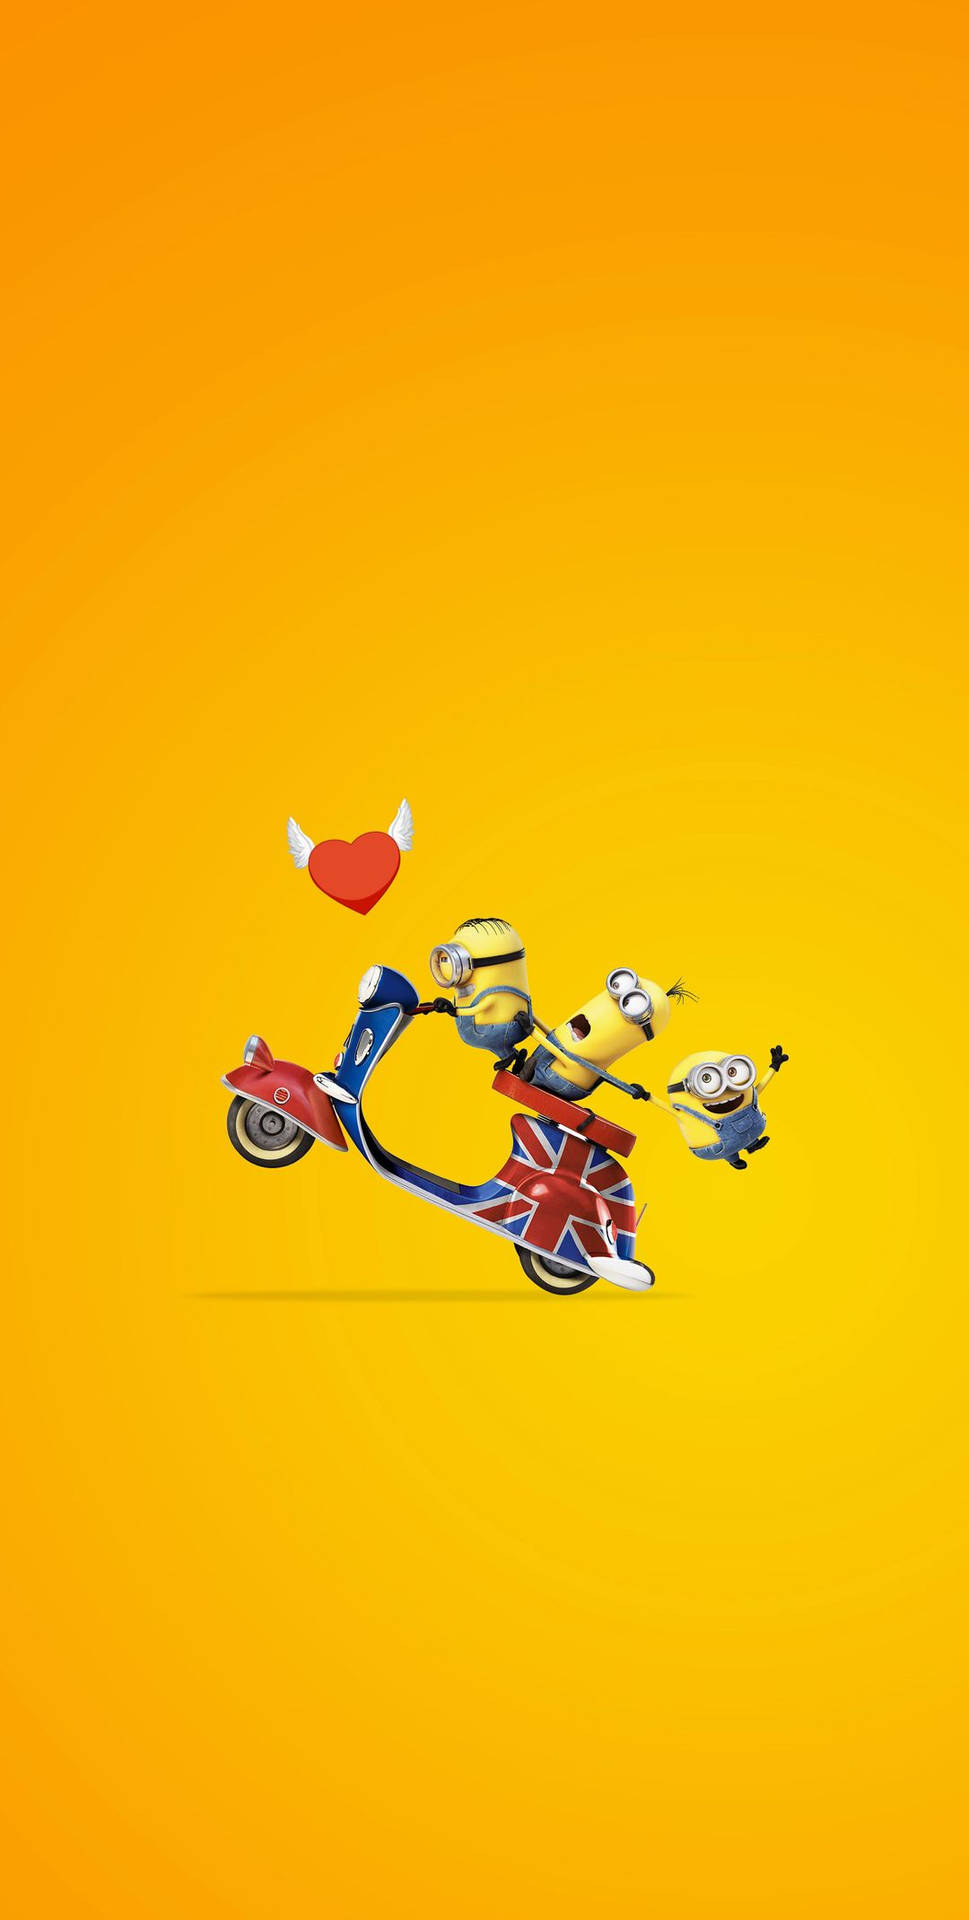 A Yellow Background With A Group Of Cartoon Characters Riding A Scooter Wallpaper